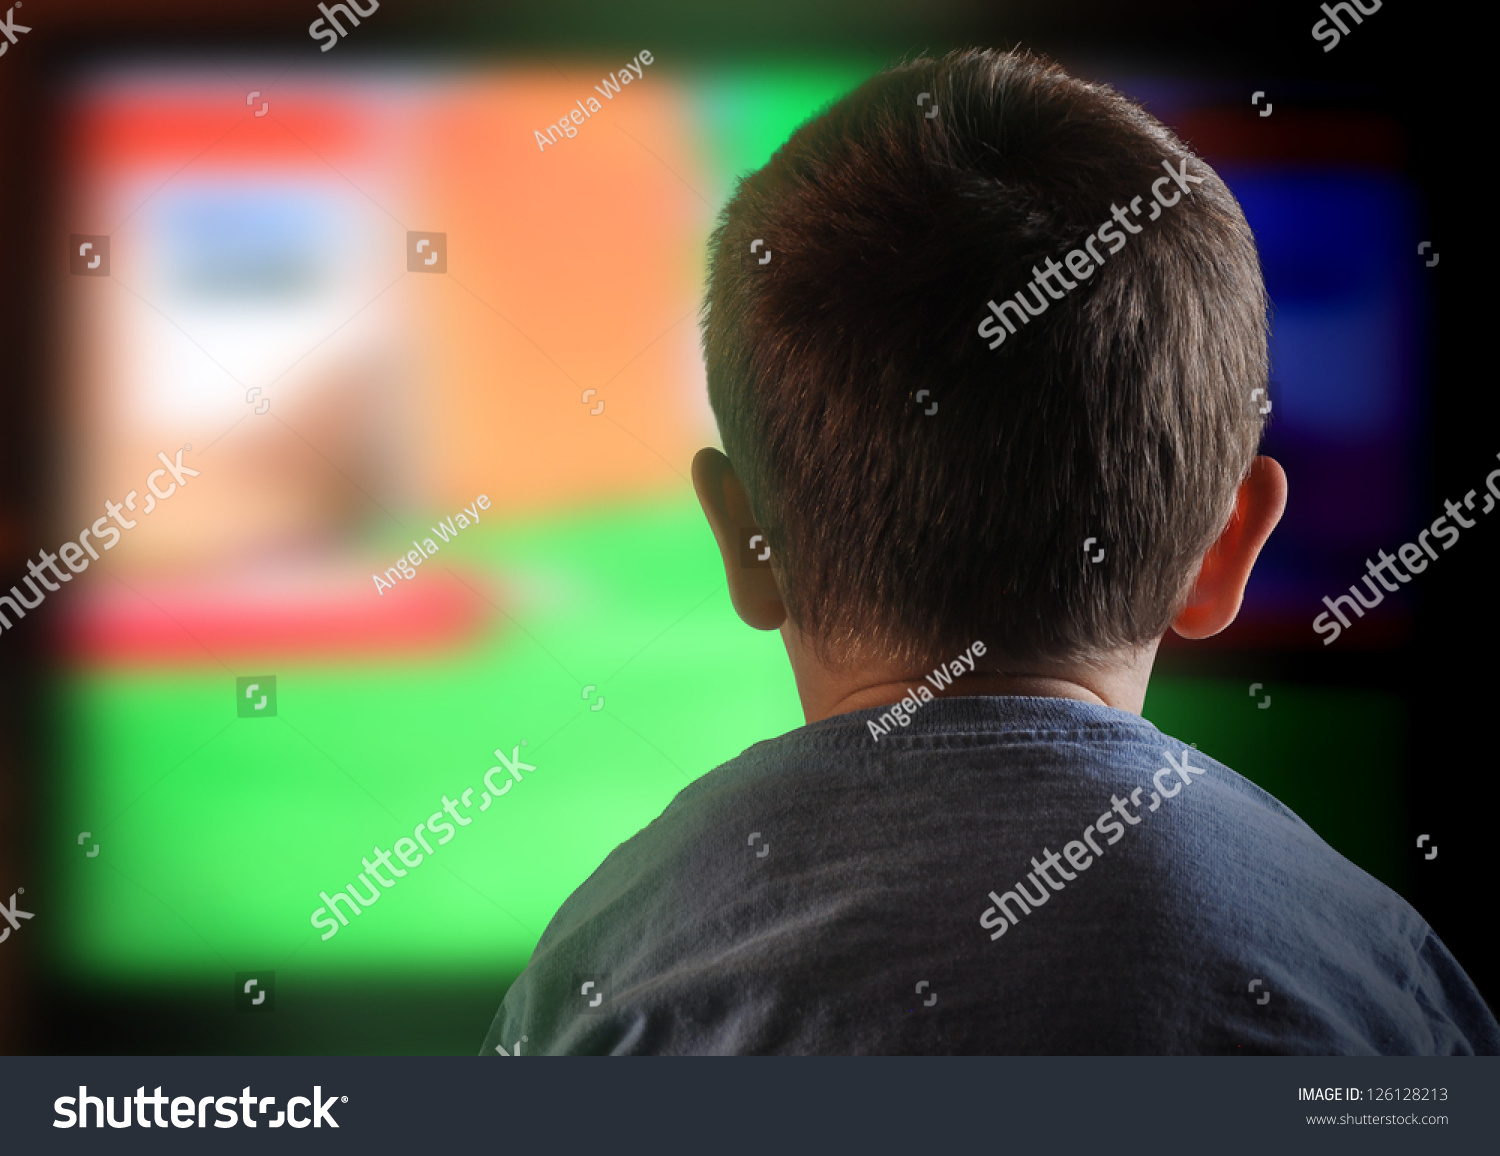 A young boy is watching a television screen with his back for a tv effect on children or a communication concept. #126128213